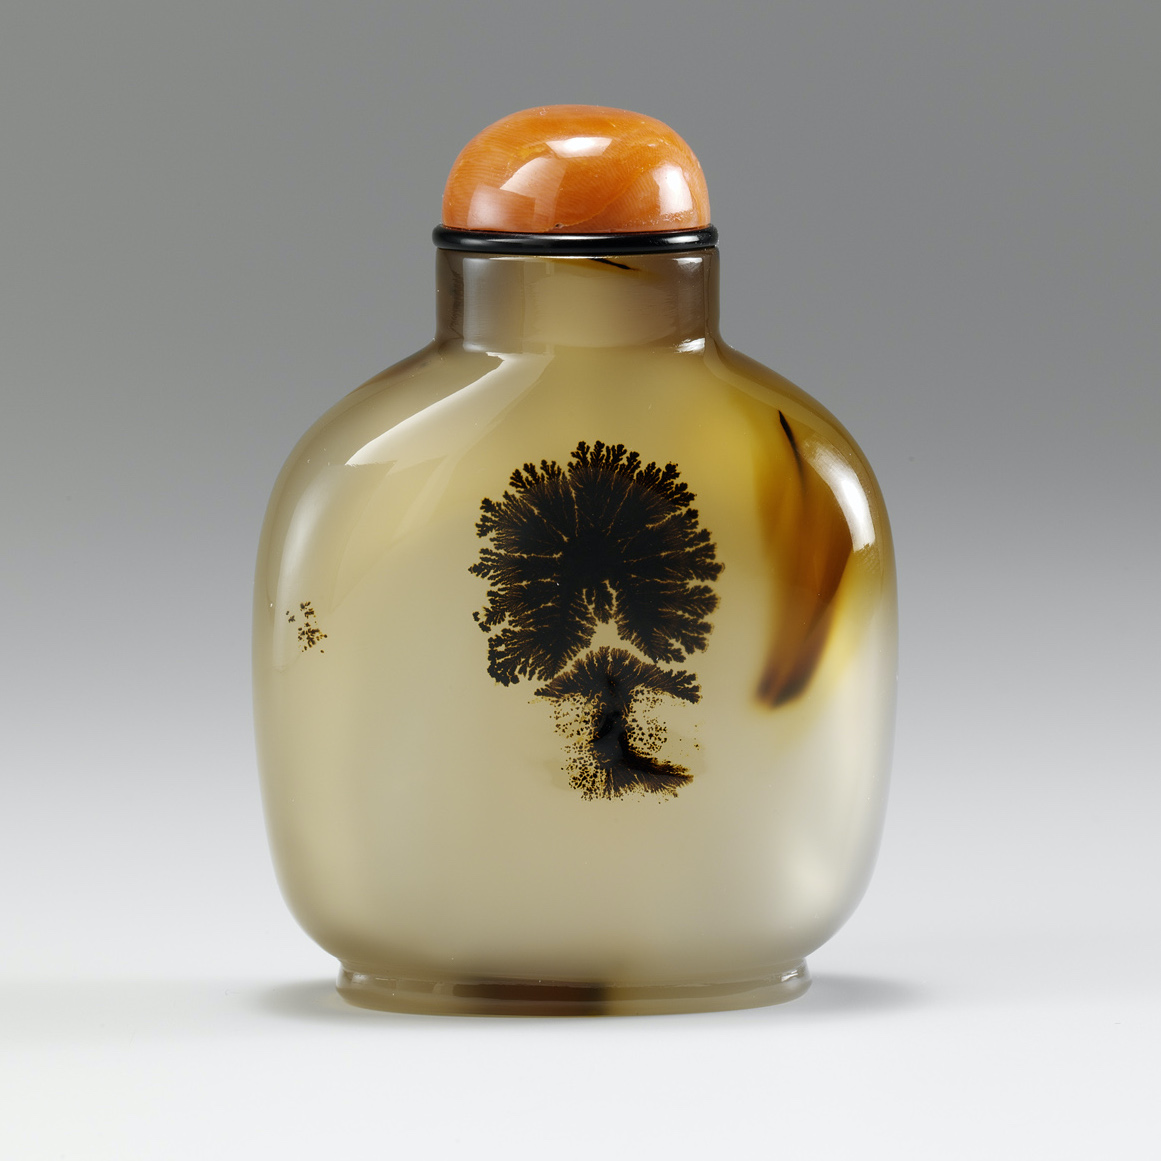 Chalcedony with darker dendritic tree like inclusion, 1750-1850